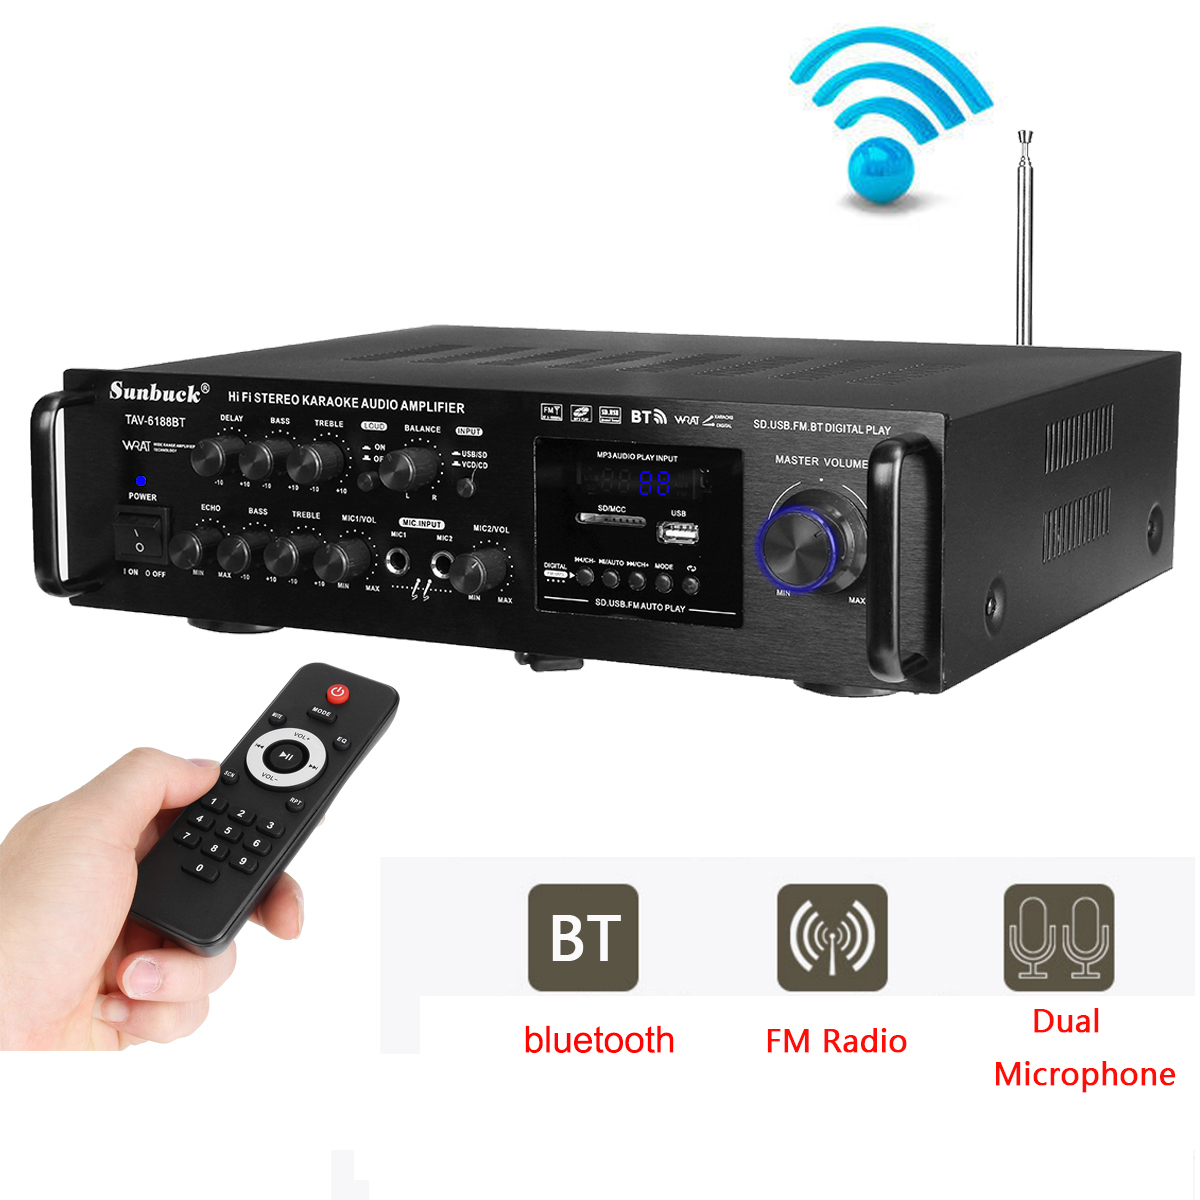 2000W Sunbuck Audio Powered Amplifier & bluetooth Receiver Stereo System, FM Radio, Microphone Inputs, MP3/USB/SD/AUX , 5CH For Home